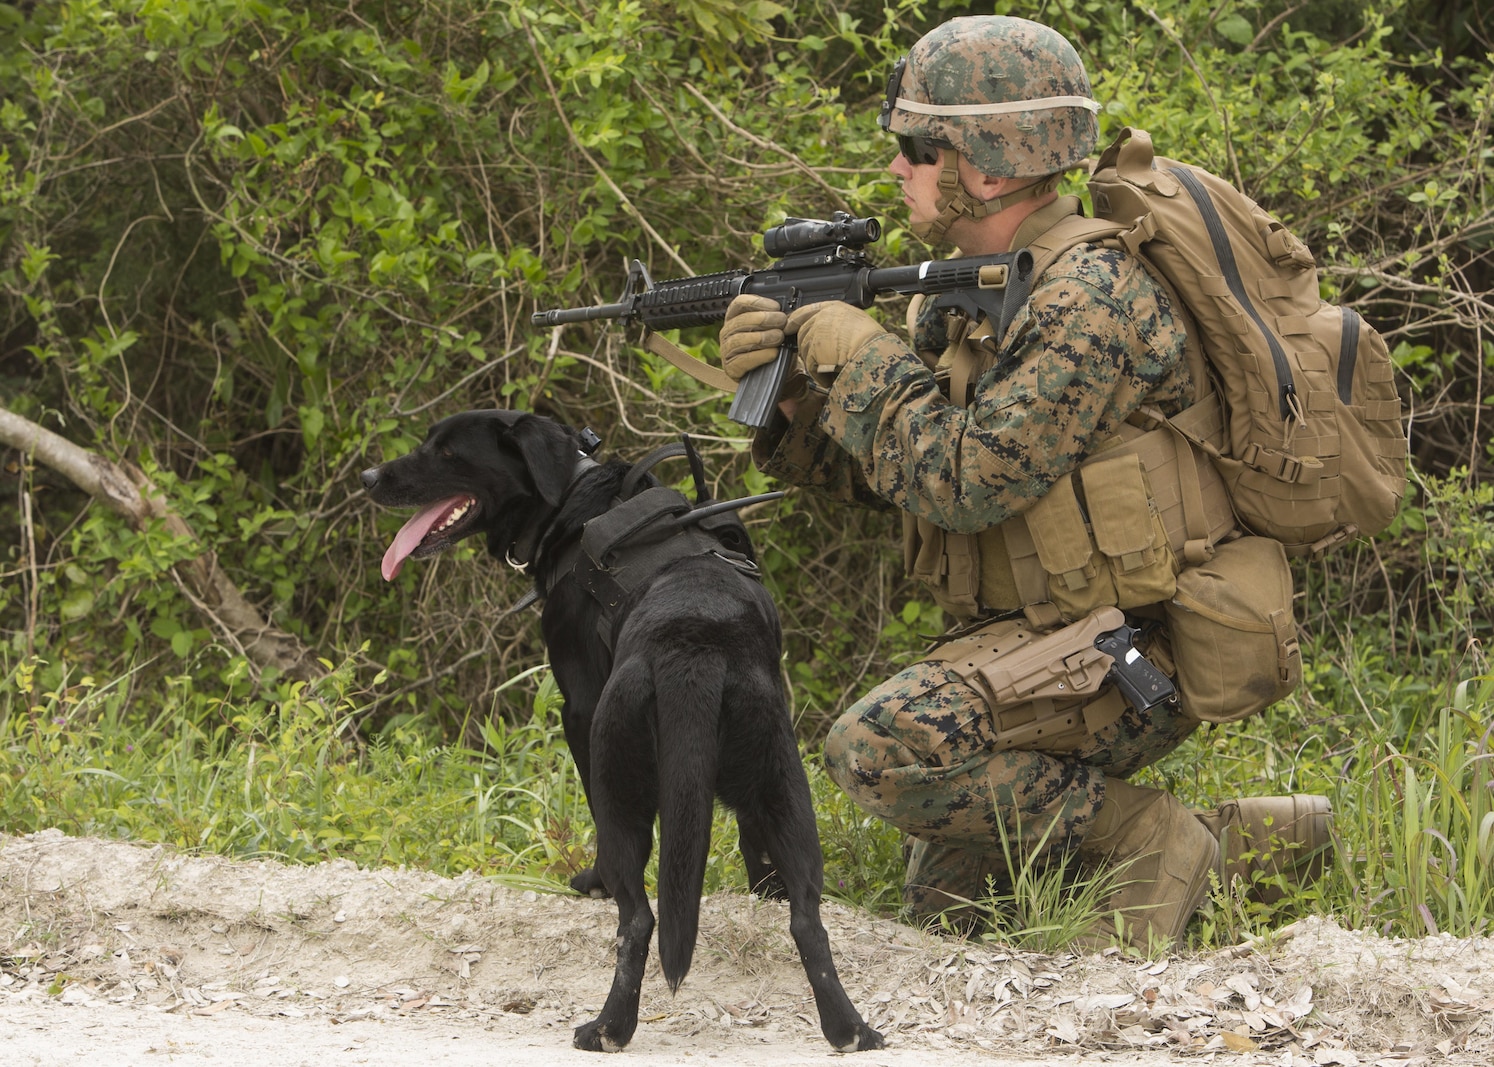 Lance Cpl. Anton Louis Rowe, a military working dog handler with 2nd Law Enforcement Battalion, conducts a perimeter security patrol with his explosive-detection dog Breezy, during the II Marine Expeditionary Force Command Post Exercise 3 at Camp Lejeune, N.C., April 20, 2016. During the CPX, 2nd LEB posted security around the campsite and defended it from mock enemies, ensuring the headquarters element could complete the mission safely. (U.S. Marine Corps photo by Cpl. Michelle Reif/Released)